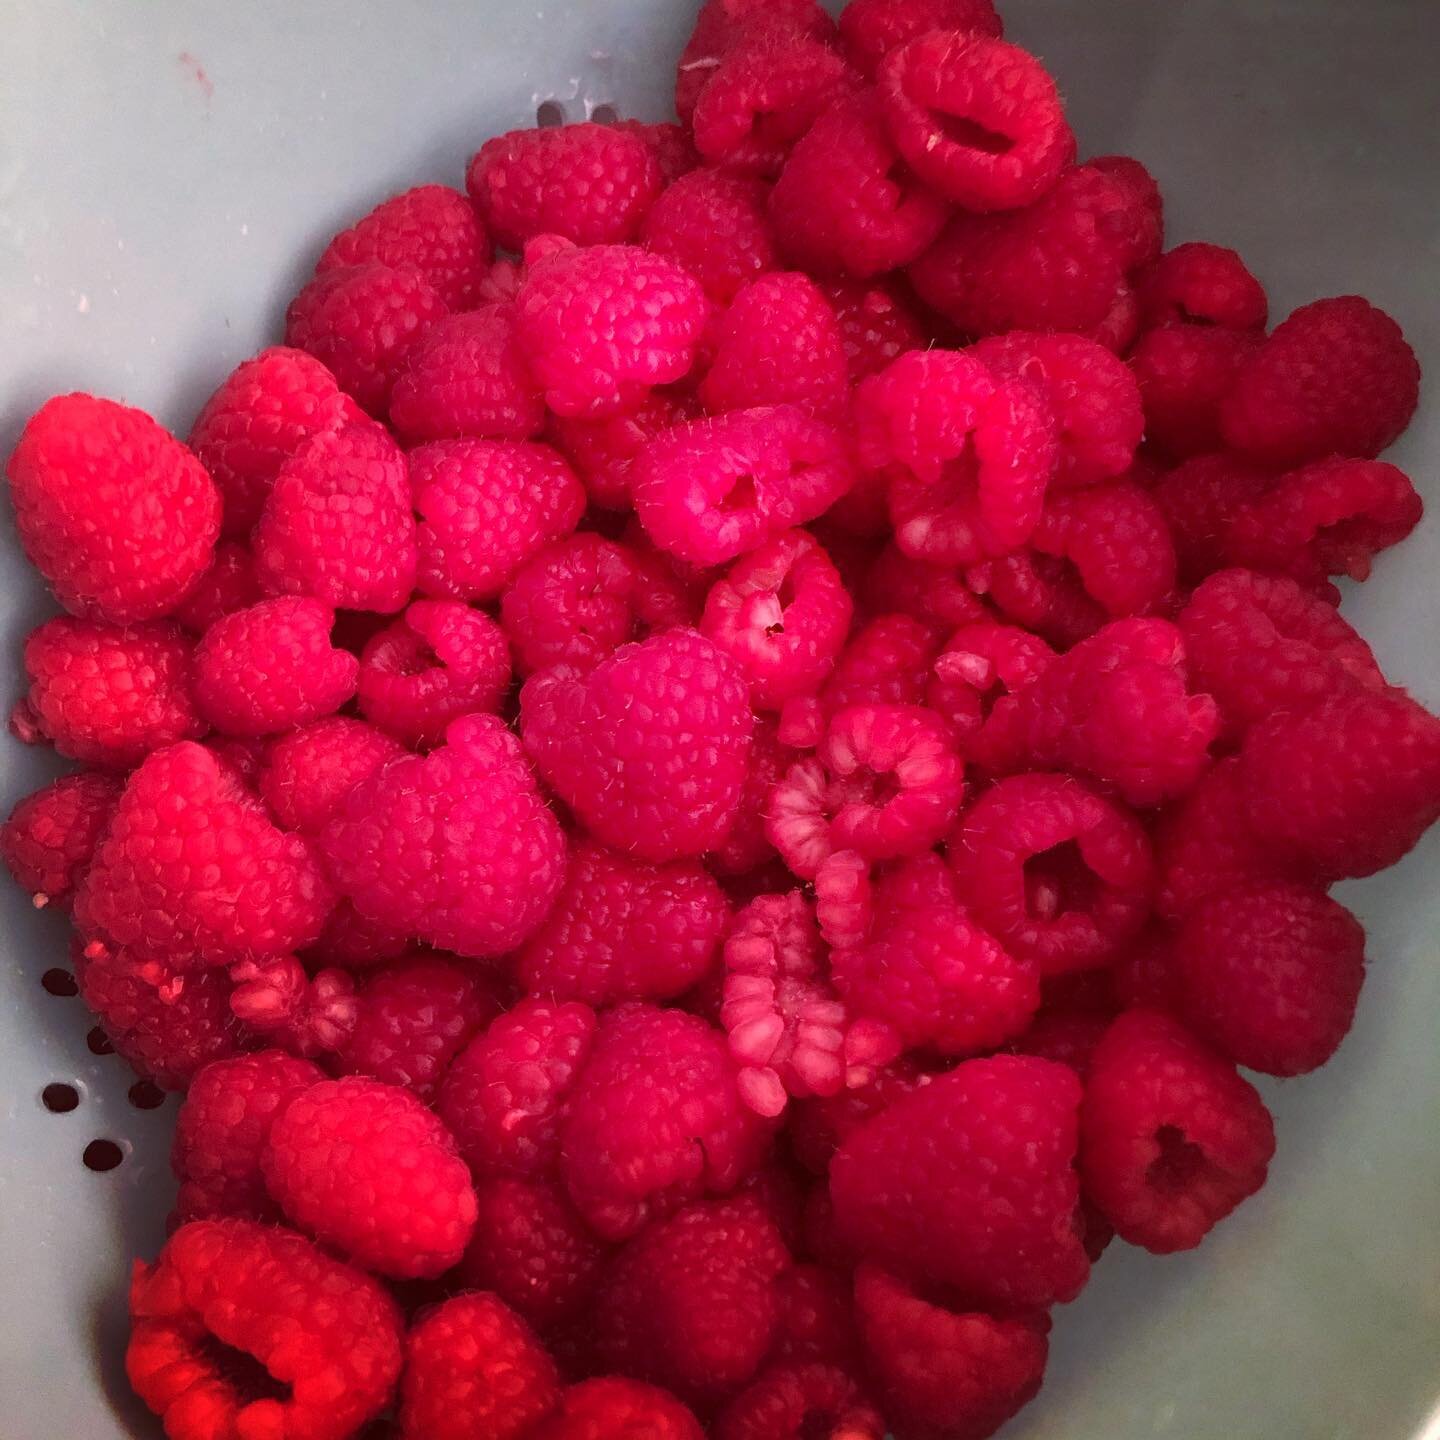 | Early Morning &bull; Berry Bliss🍓| 

I got off to an early start this morning to get these gorgeous raspberries into the dehydrator. They will take 12-14 hours to finish, so the earlier I got them in the better. These ruby red gems will be a part 